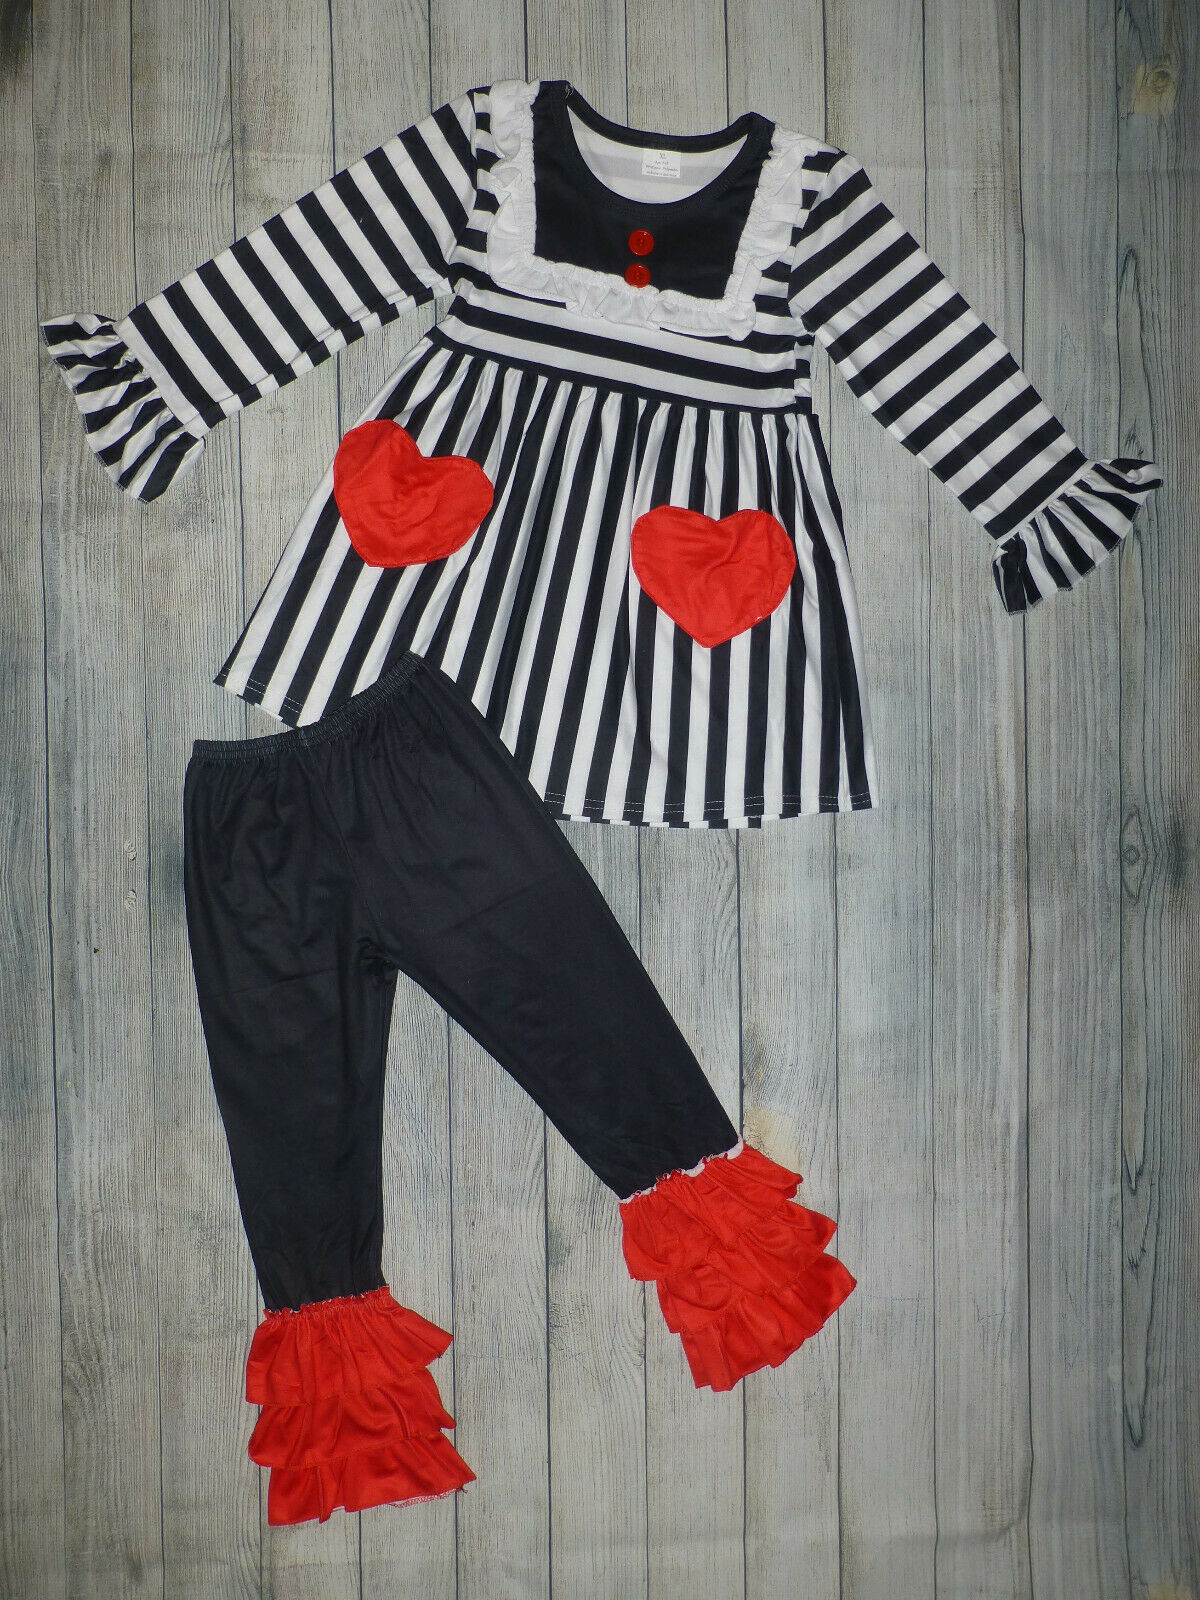 Primary image for NEW Boutique Valentine's Day Heart Tunic Dress Ruffle Leggings Girls Outfit Set 